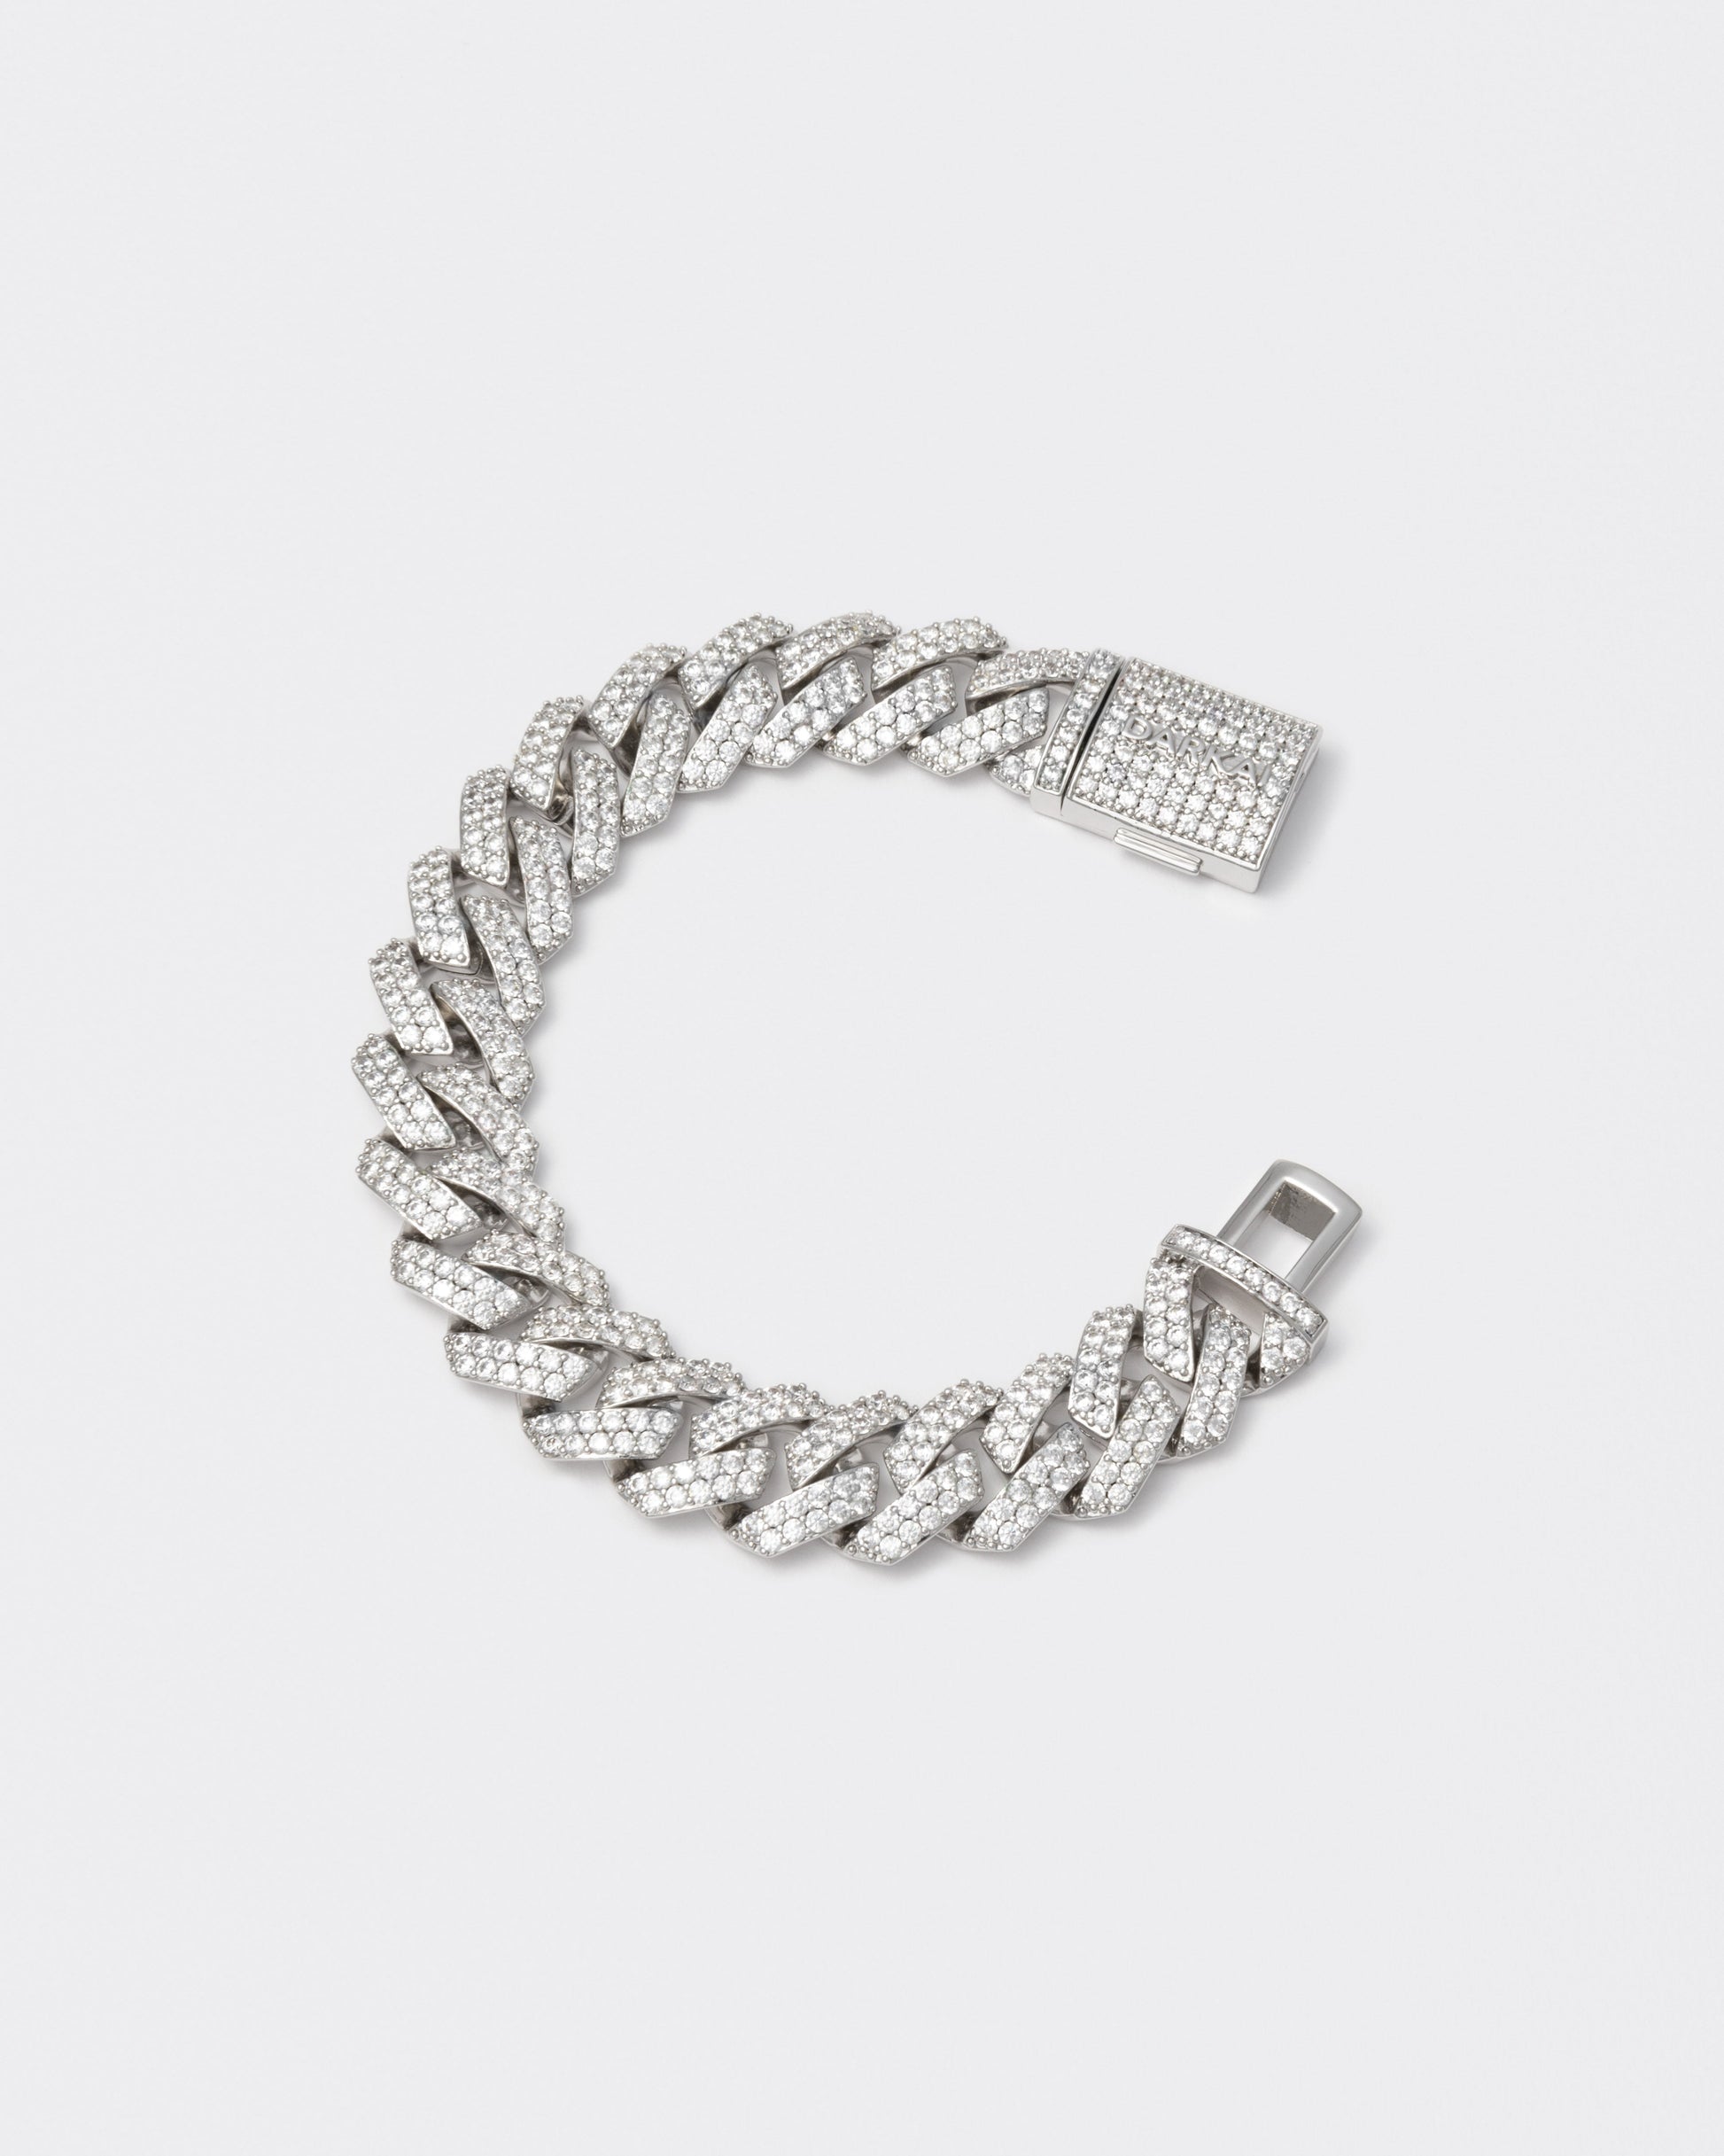 18k white gold coated prong chain bracelet with hand-set micropavé stones in white